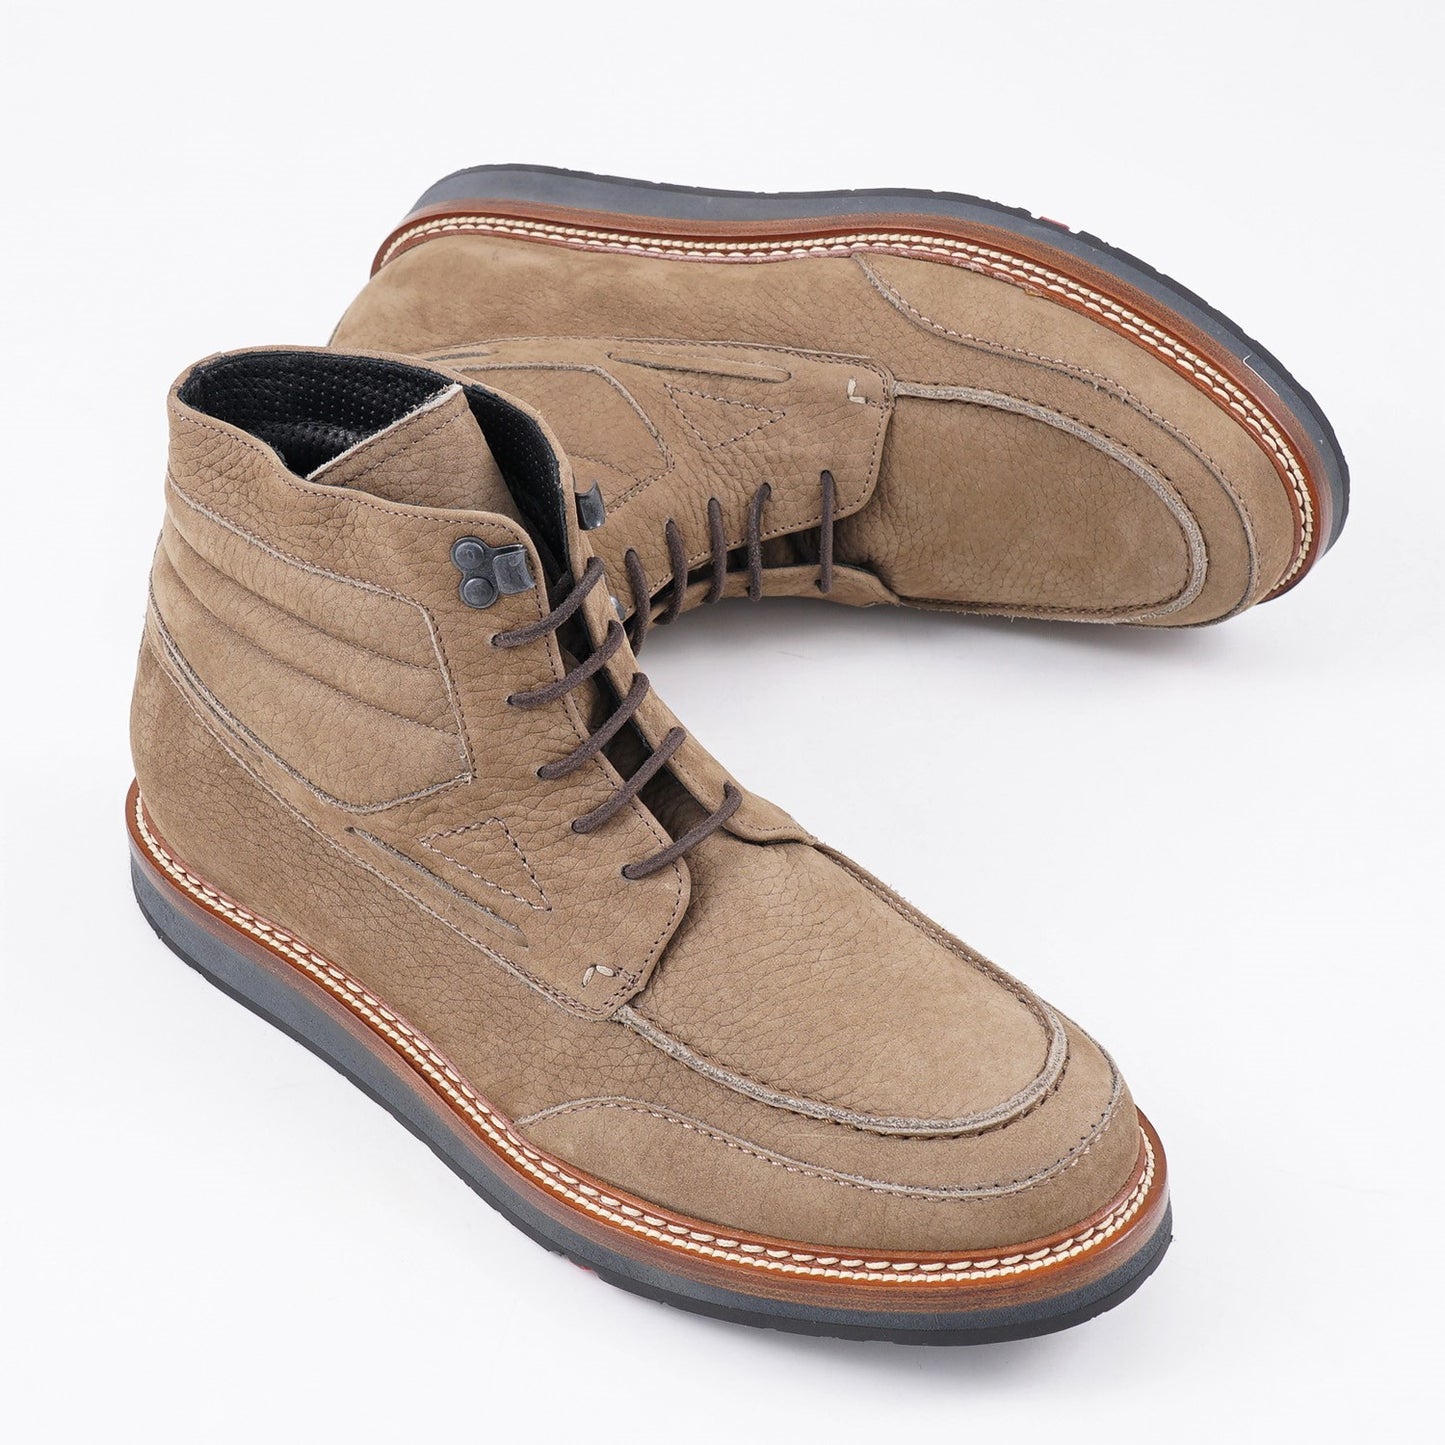 Kiton Storm-Welted Casual Boots - Top Shelf Apparel